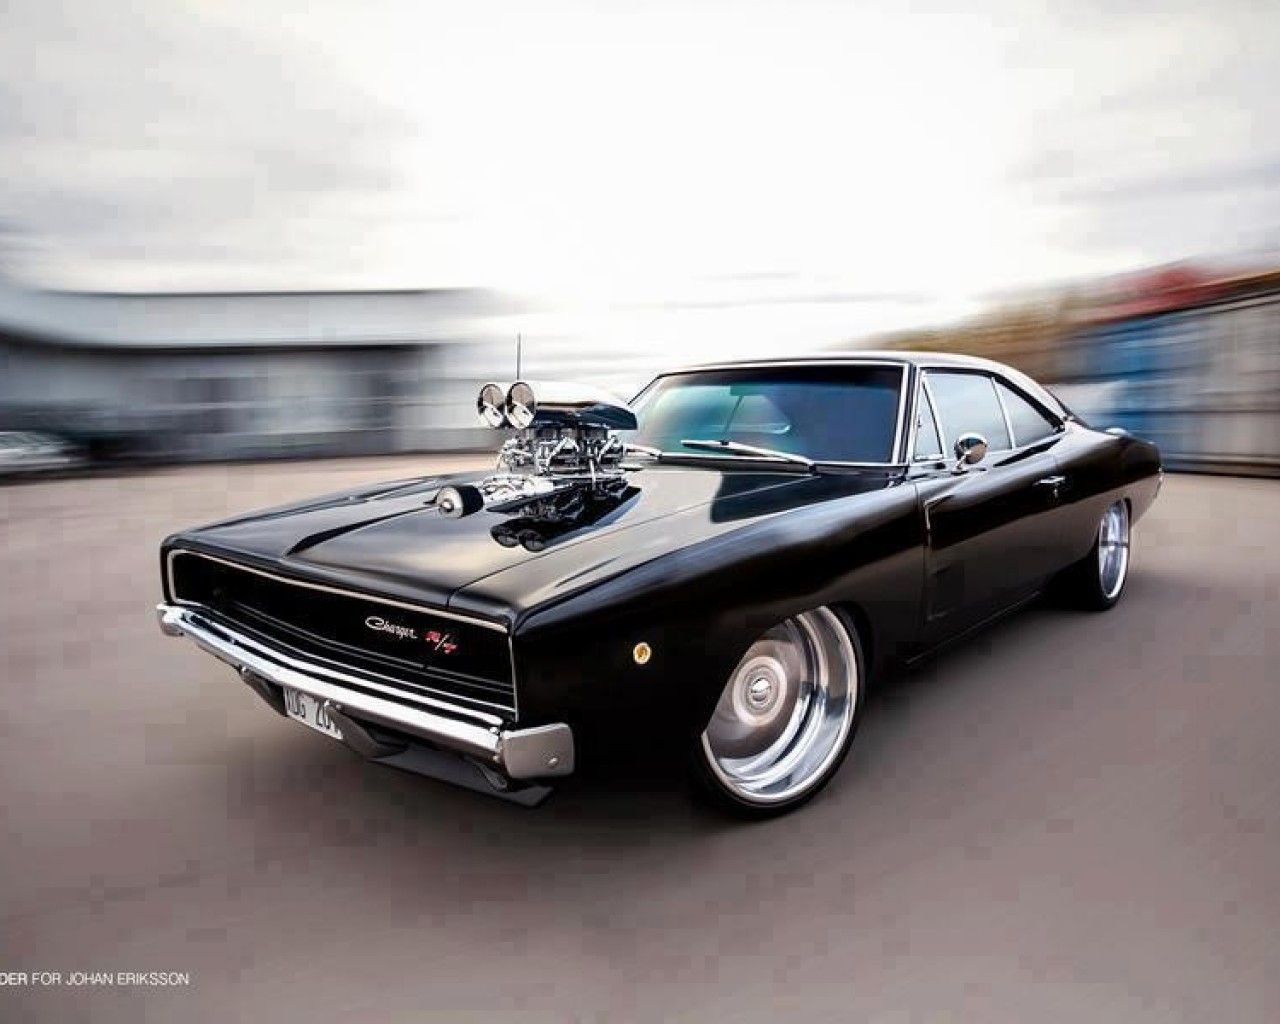 Dodge Charger RT wallpaper, Vehicles, HQ Dodge Charger RT pictureK Wallpaper 2019